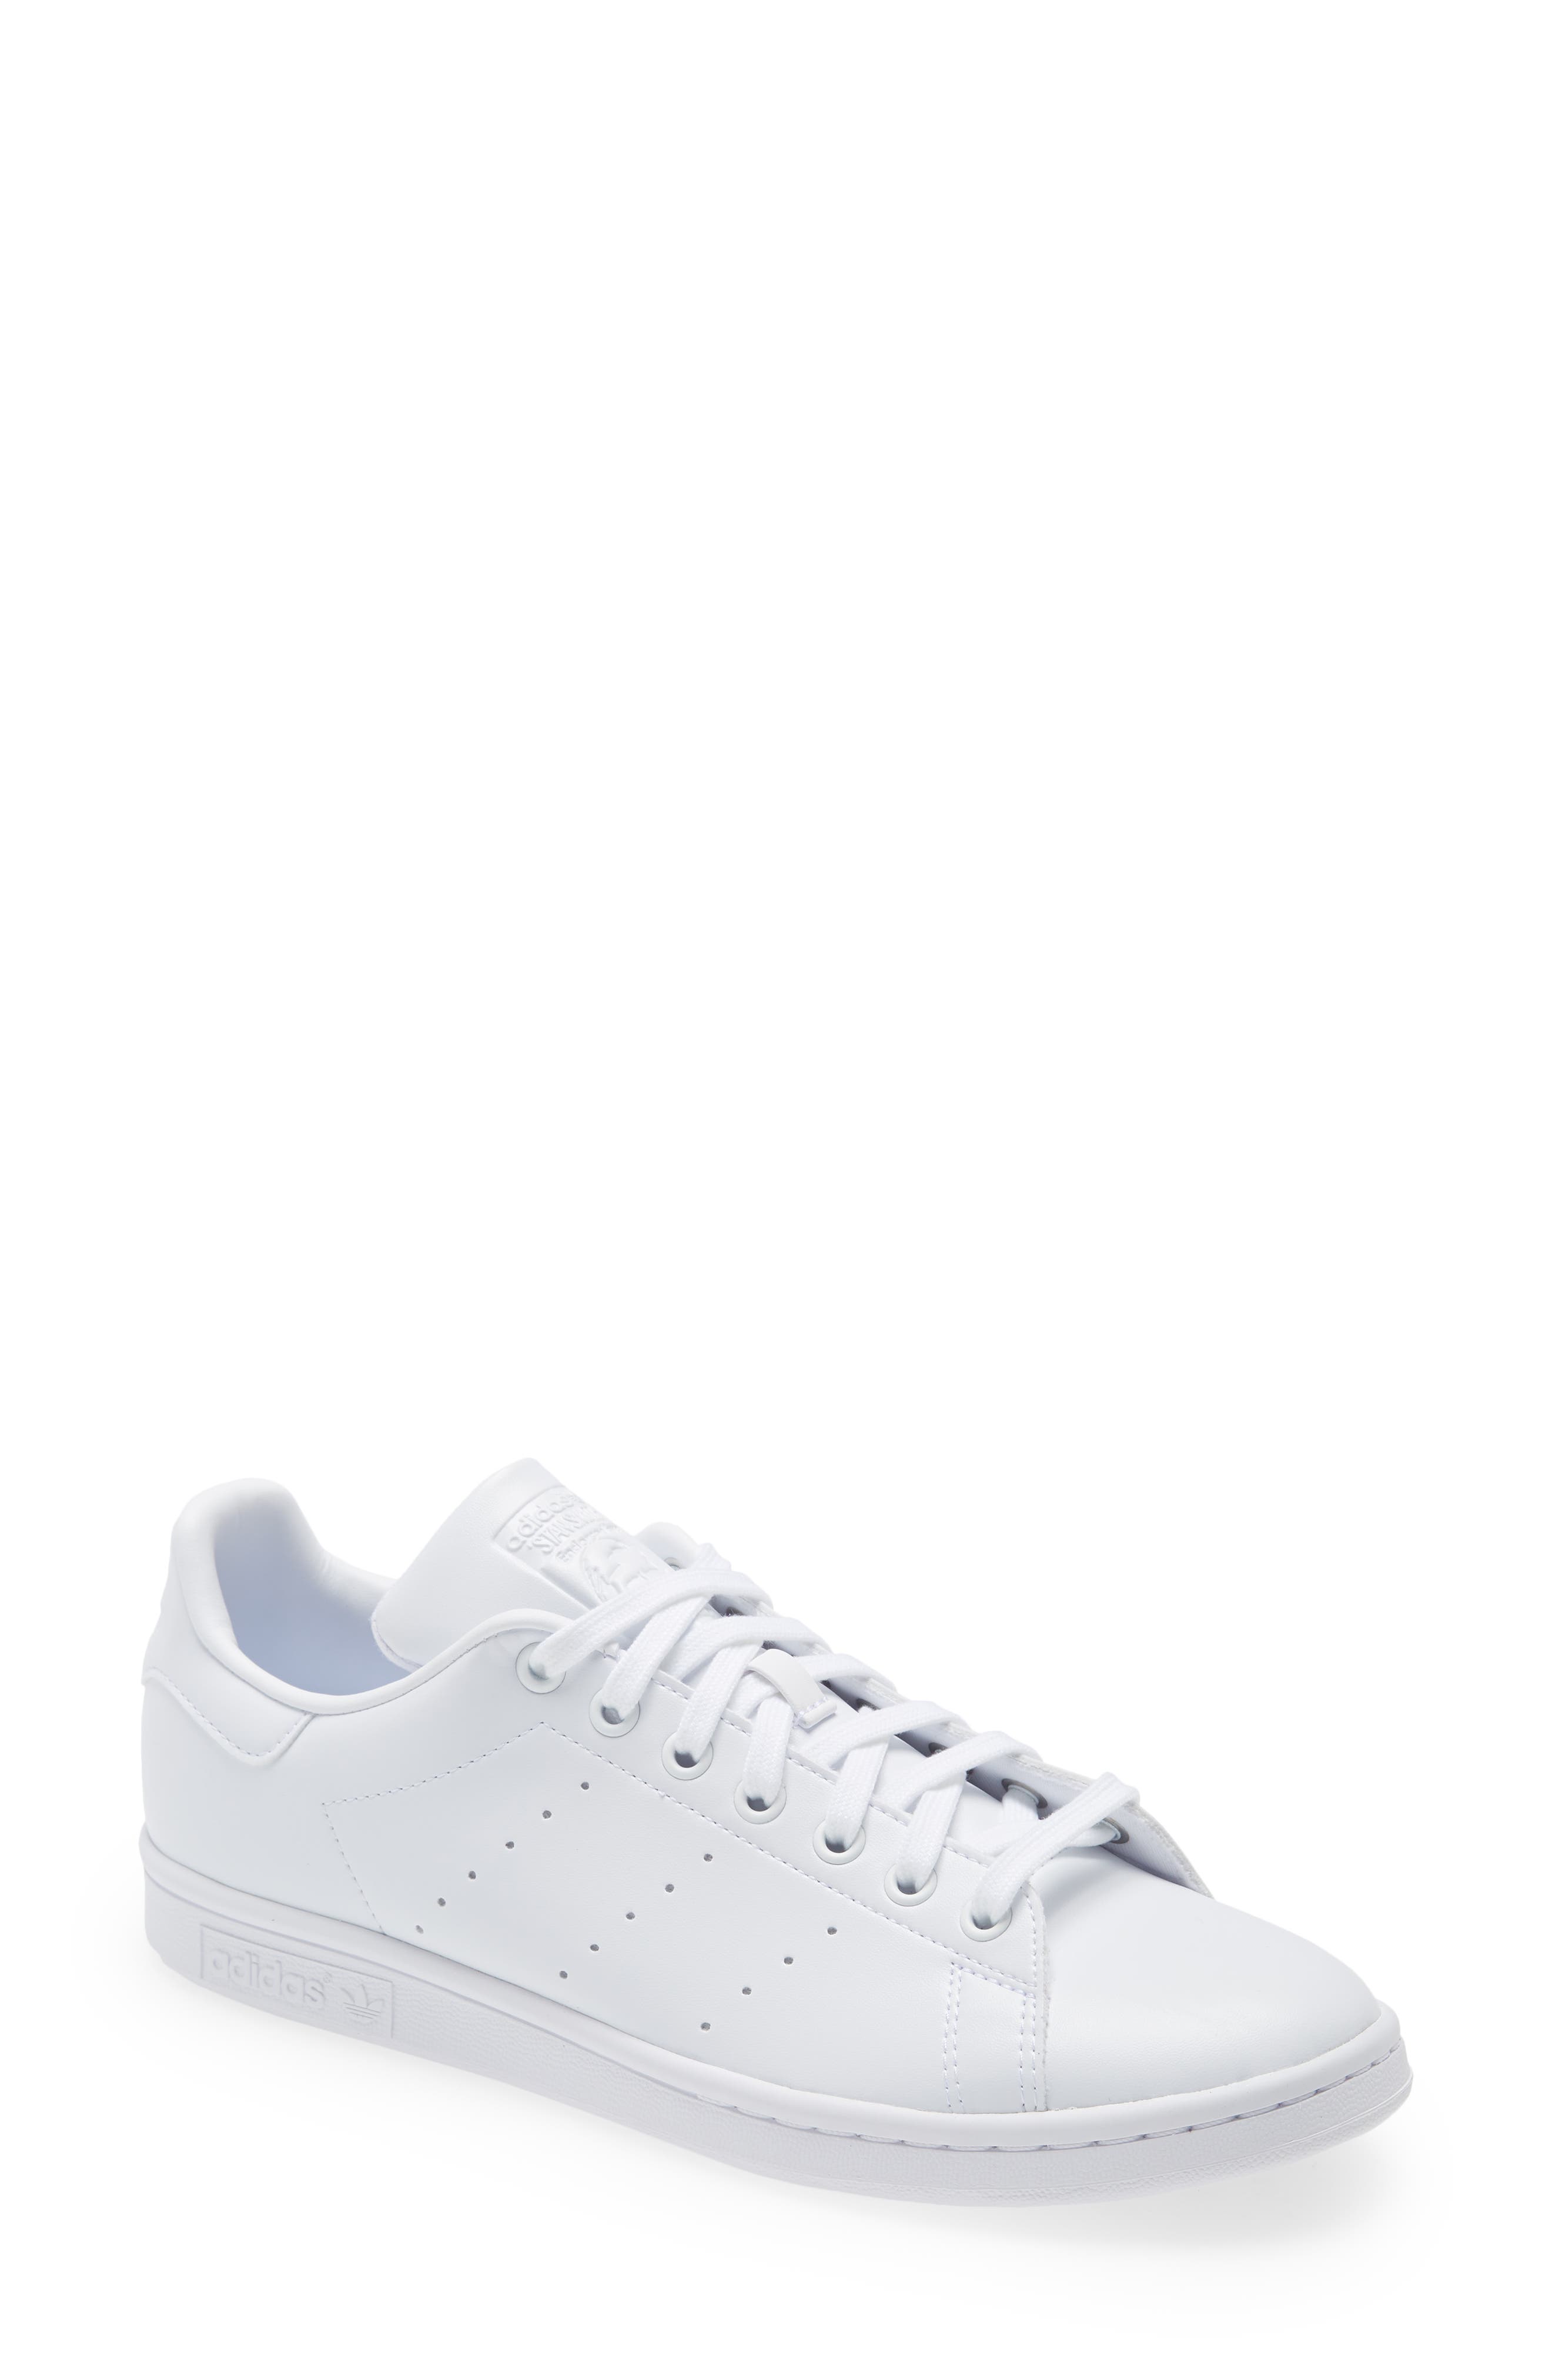 Men's Adidas White Sneakers \u0026 Athletic Shoes | Nordstrom